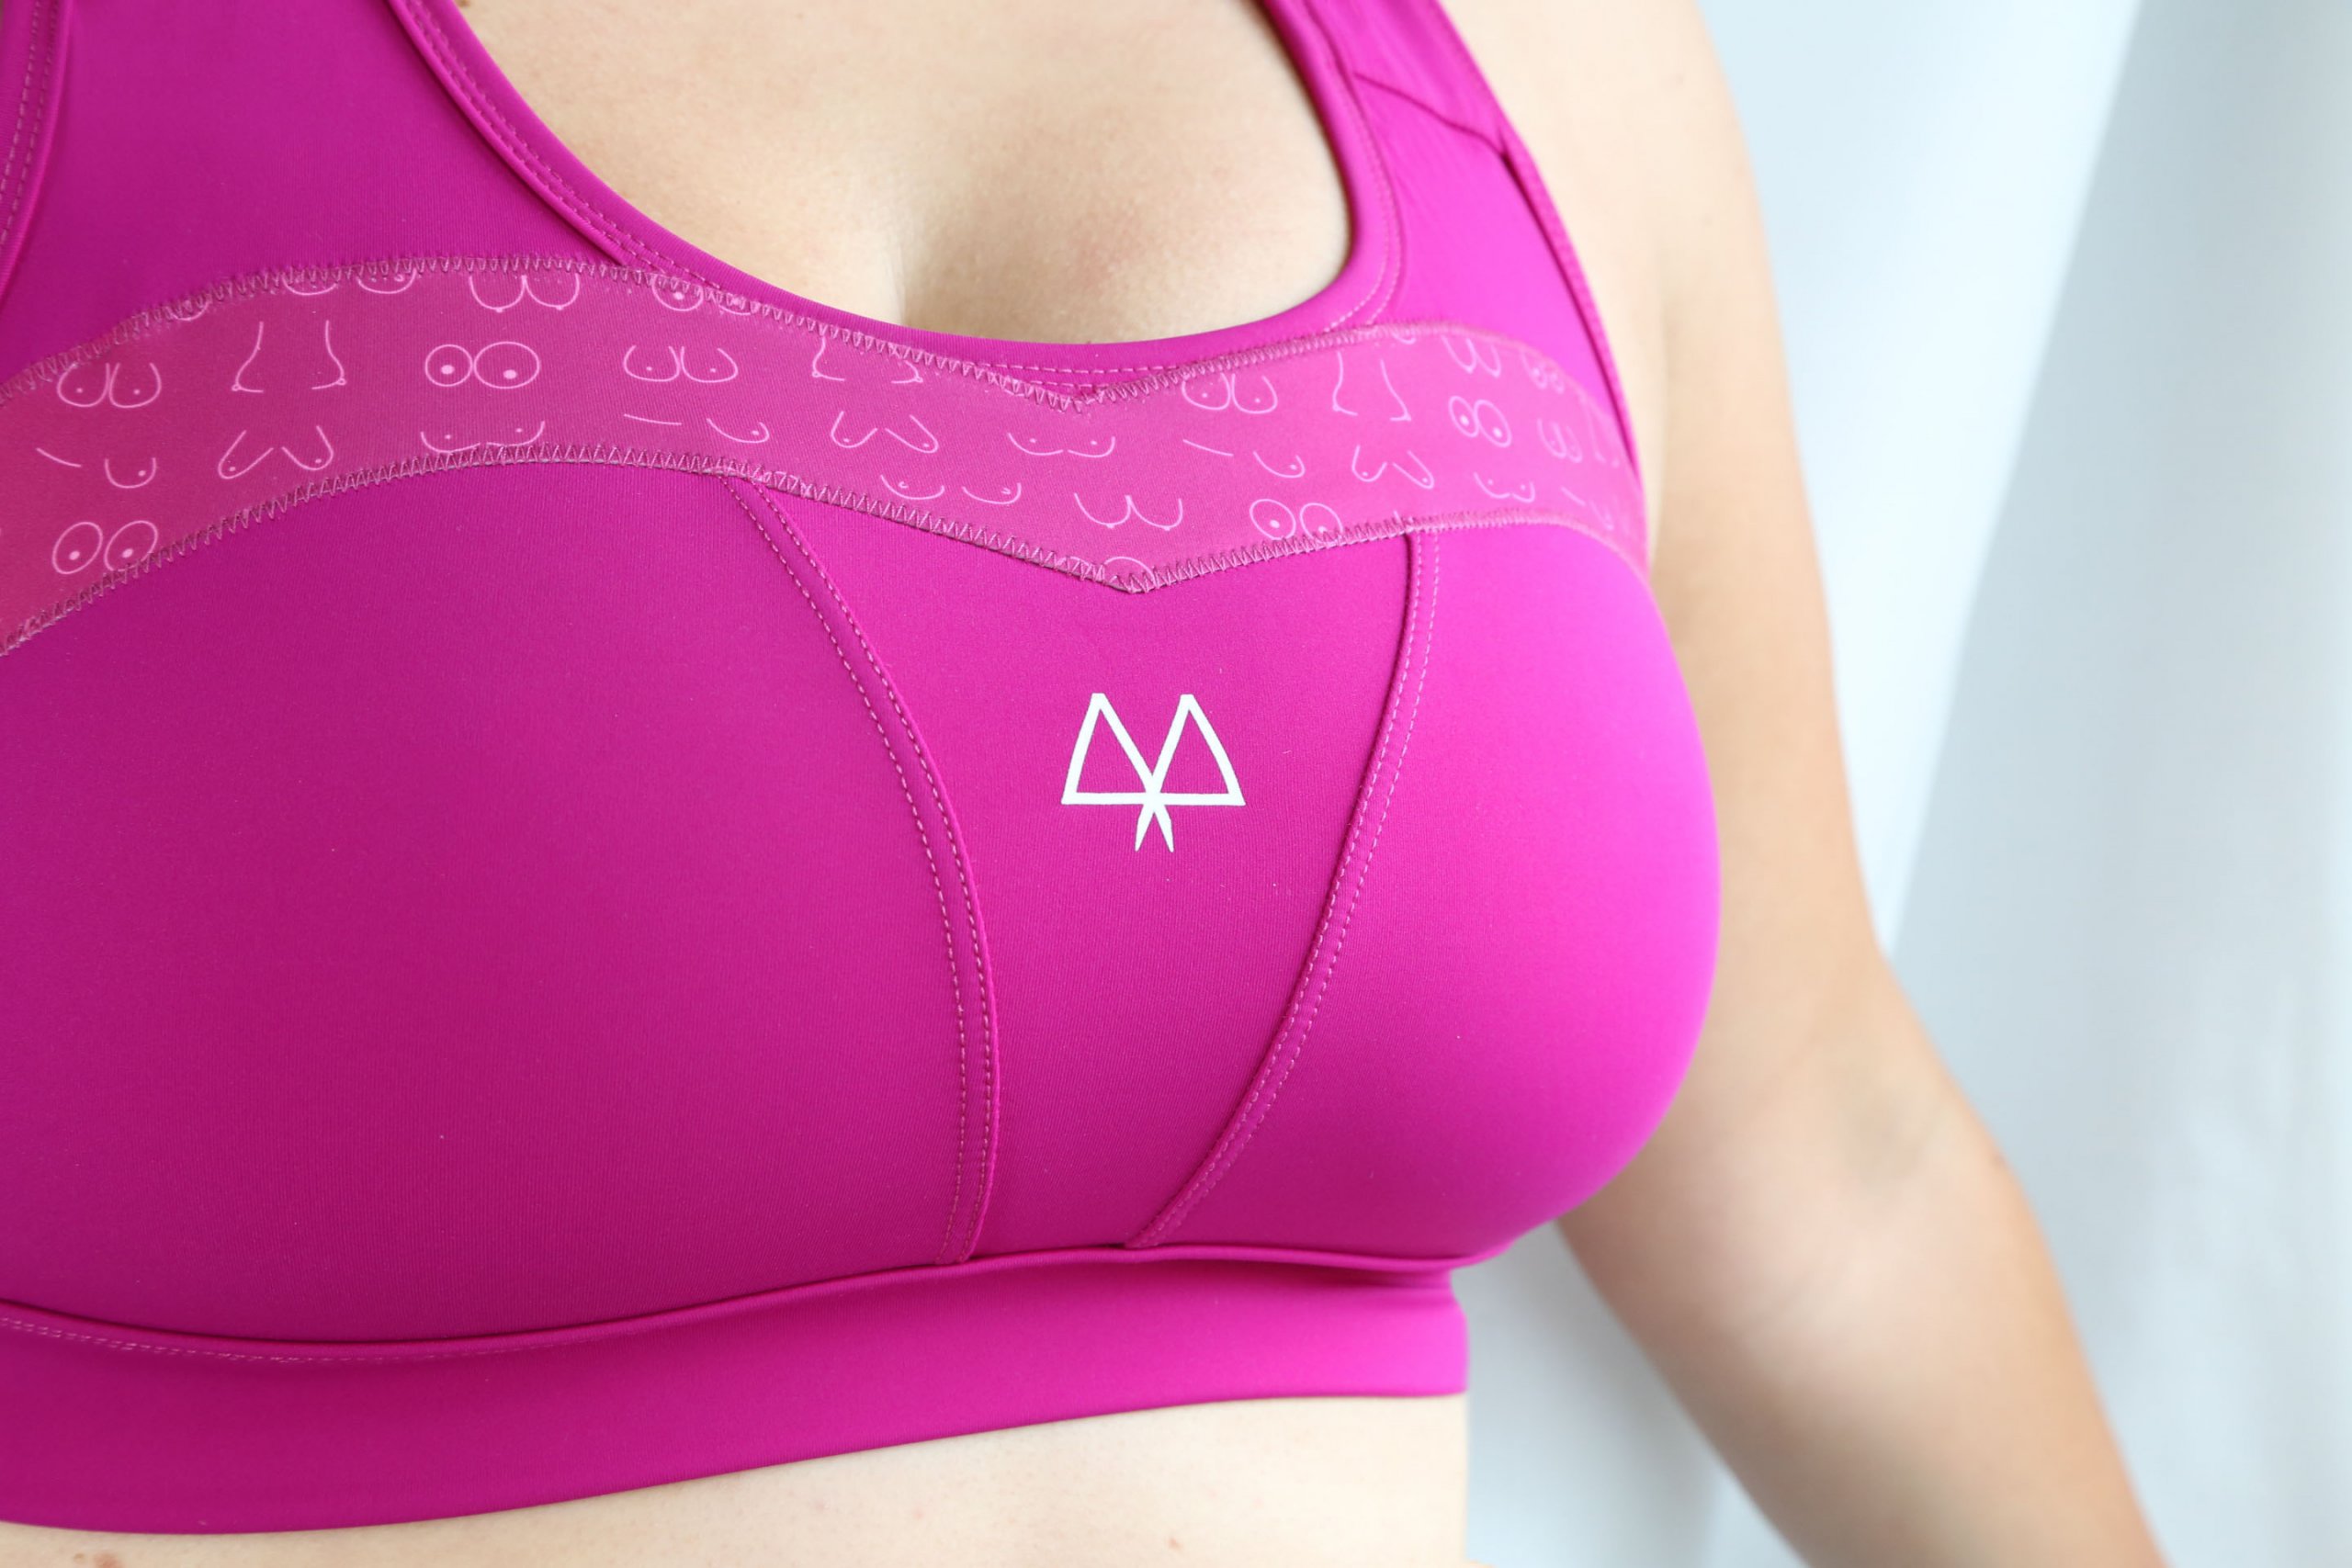 MAAREE teams up with CoppaFeel! to release a new sports bra